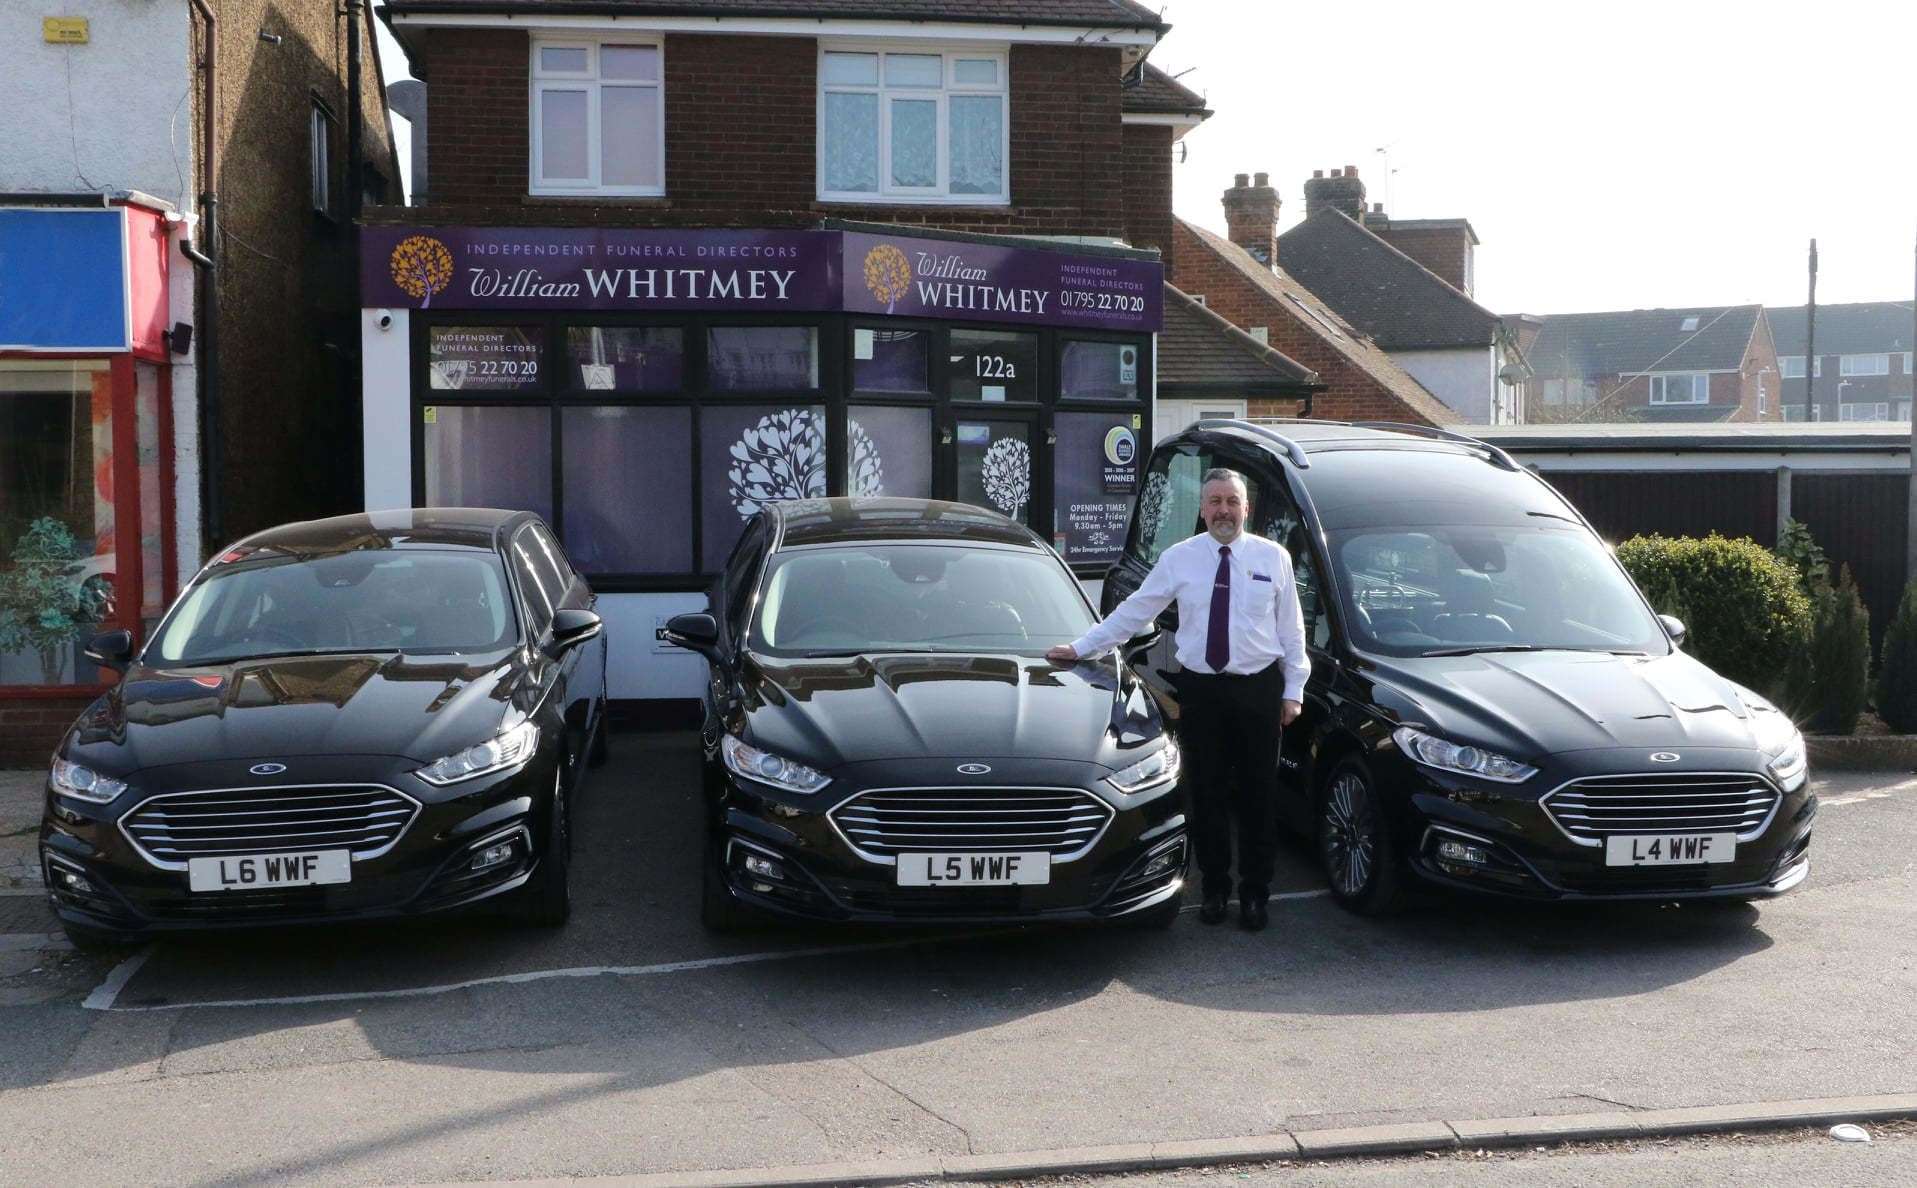 Sittingbourne undertakers William Whitmey Funeral Directors have taken delivery of a new fleet of eco-friendly hybrid limousines and hearse worth £335,000. Pictured with the firm's founder Alex Whitmey